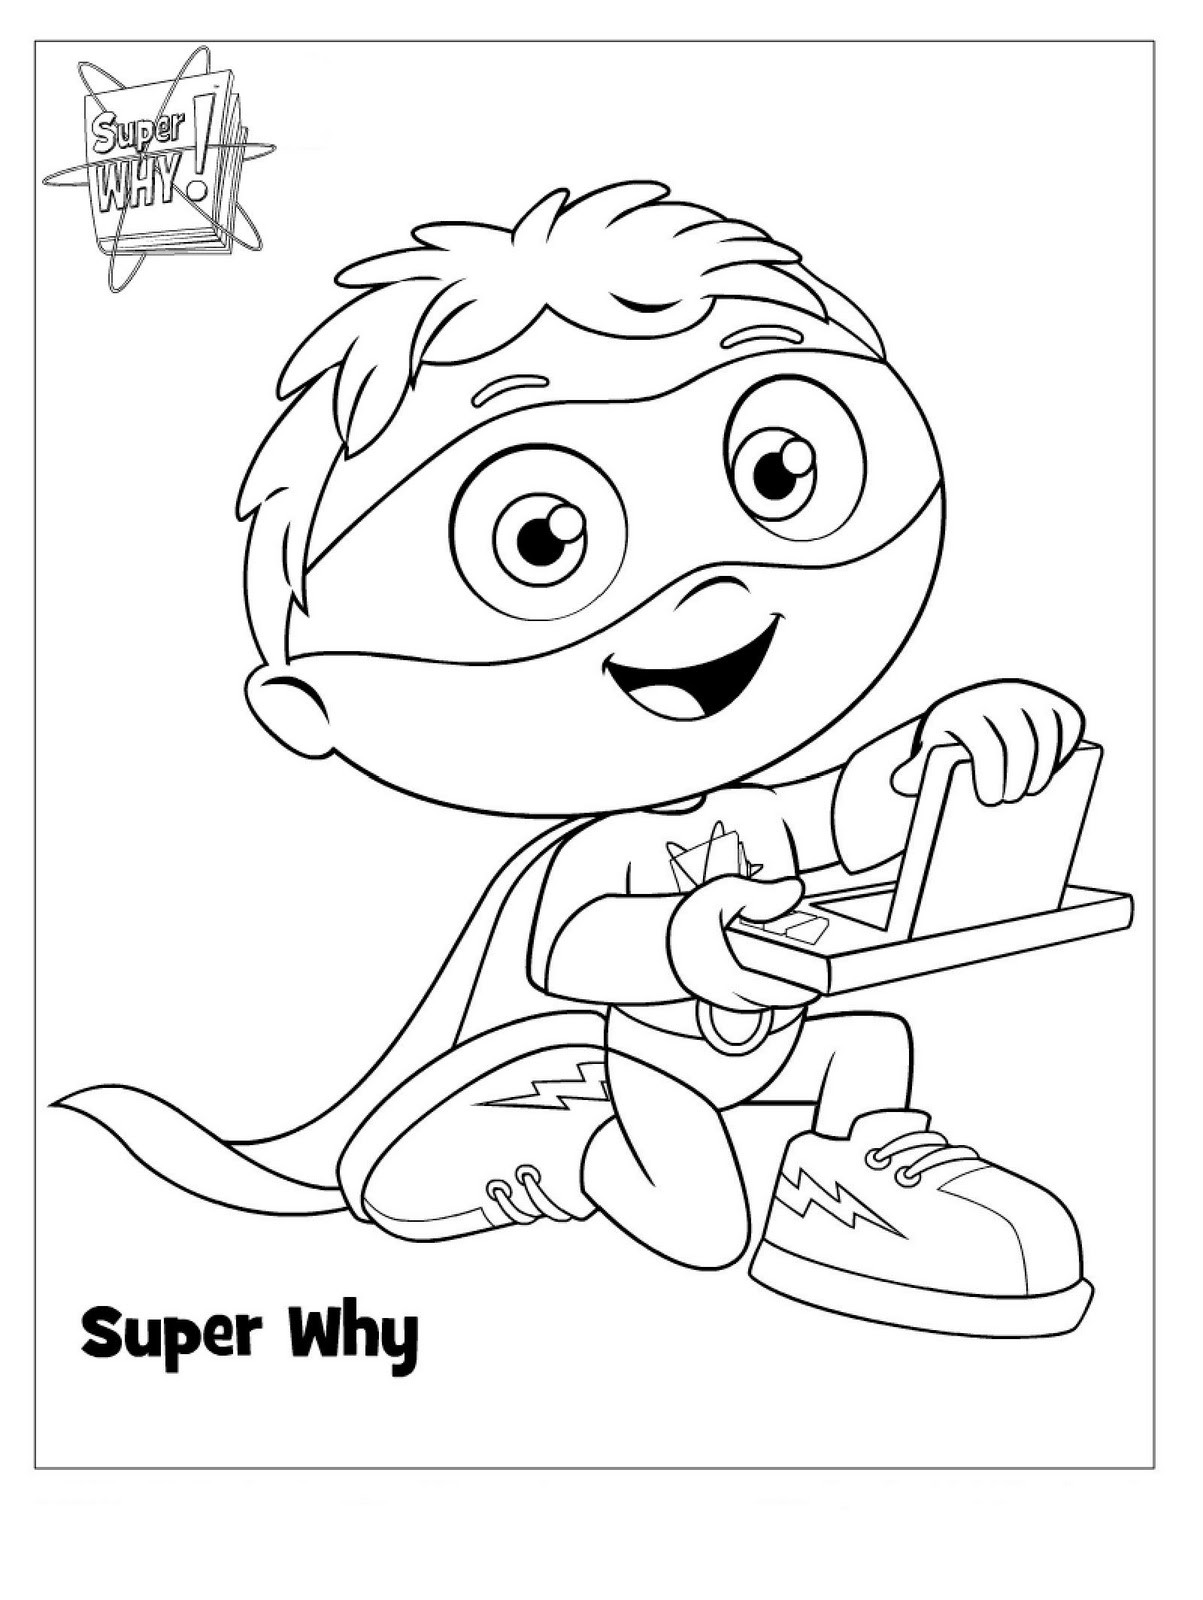 Kids Coloring Sheets
 Super Why Coloring Pages Best Coloring Pages For Kids